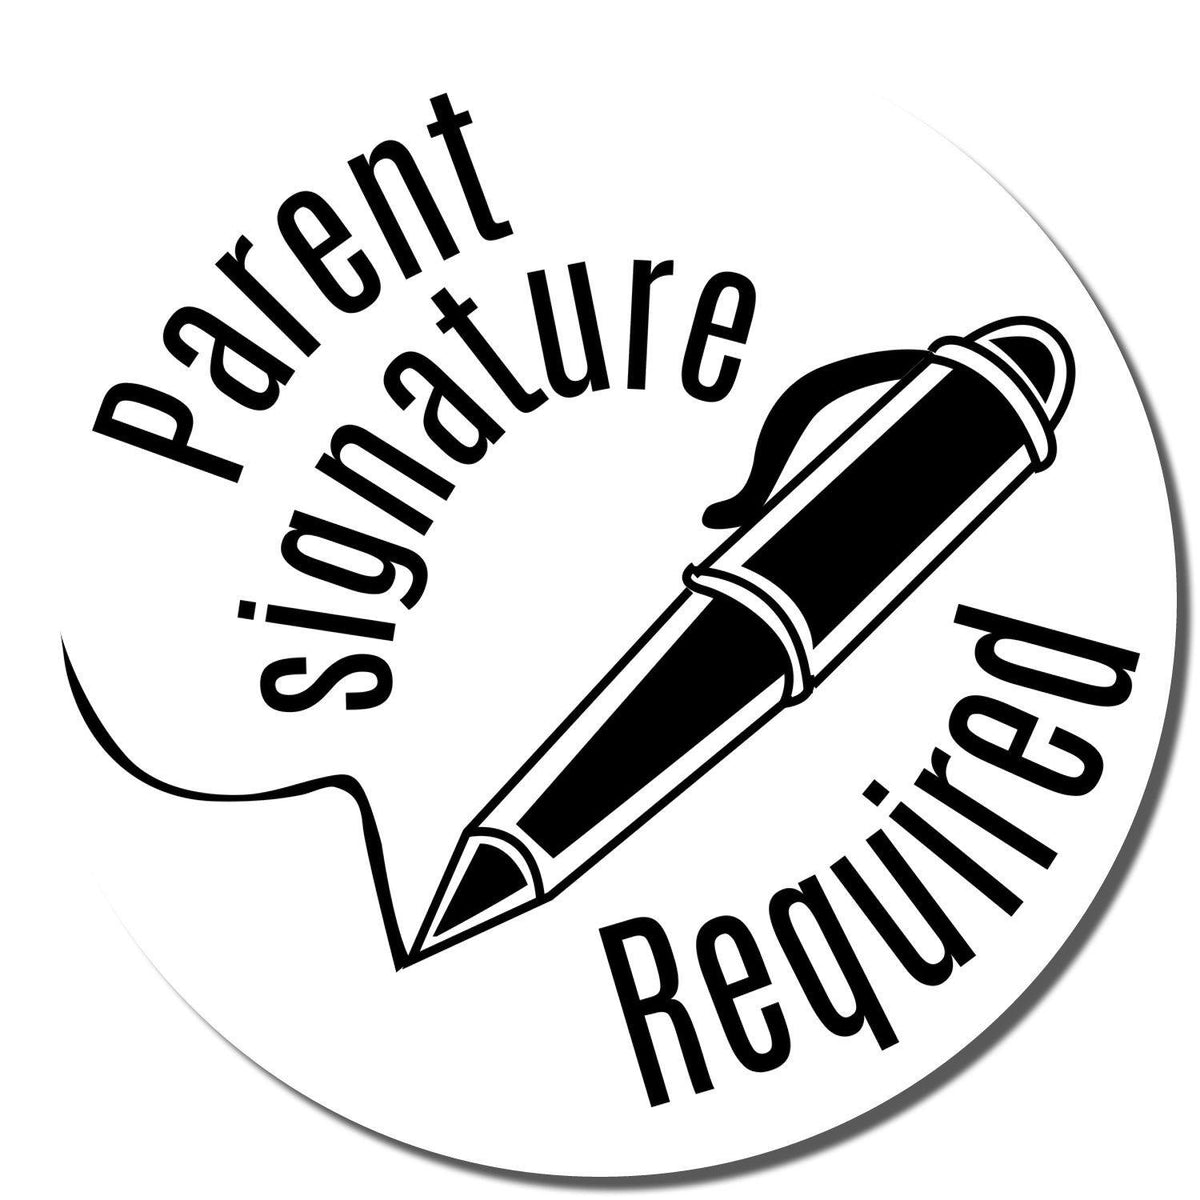 Round Parent Signature Required Rubber Stamp - Engineer Seal Stamps - Brand_Acorn, Impression Size_Small, Stamp Type_Regular Stamp, Type of Use_Teacher